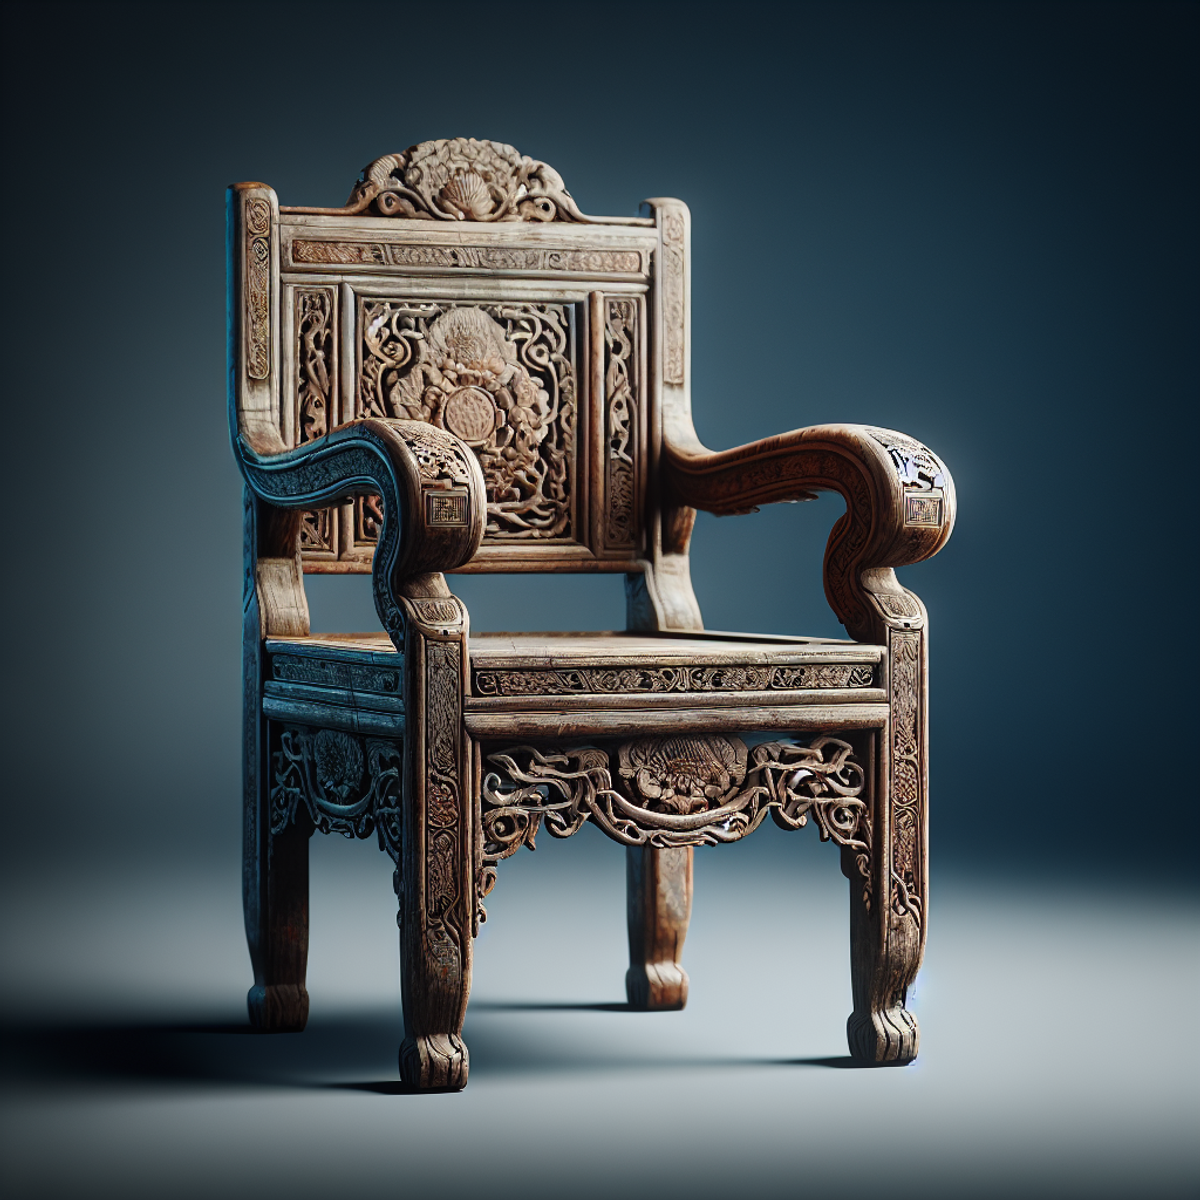 Antique appraisal wooden chair with intricate carvings and faded patina.